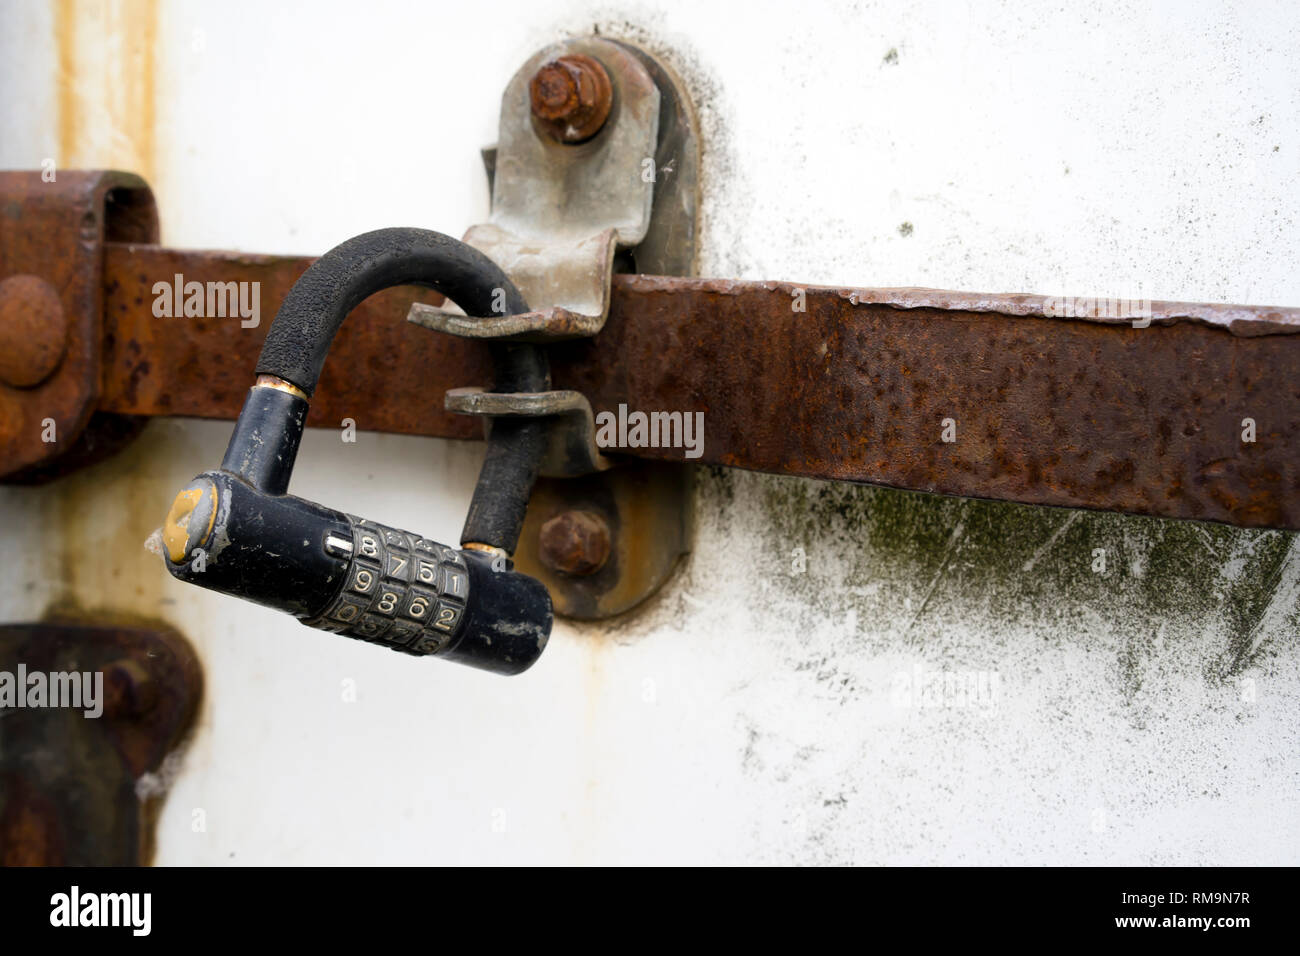 An old digital dial-padded combination padlock keeps the deadbolt on the doors of an old rusted semi trailer from unauthorized access to the goods sto Stock Photo